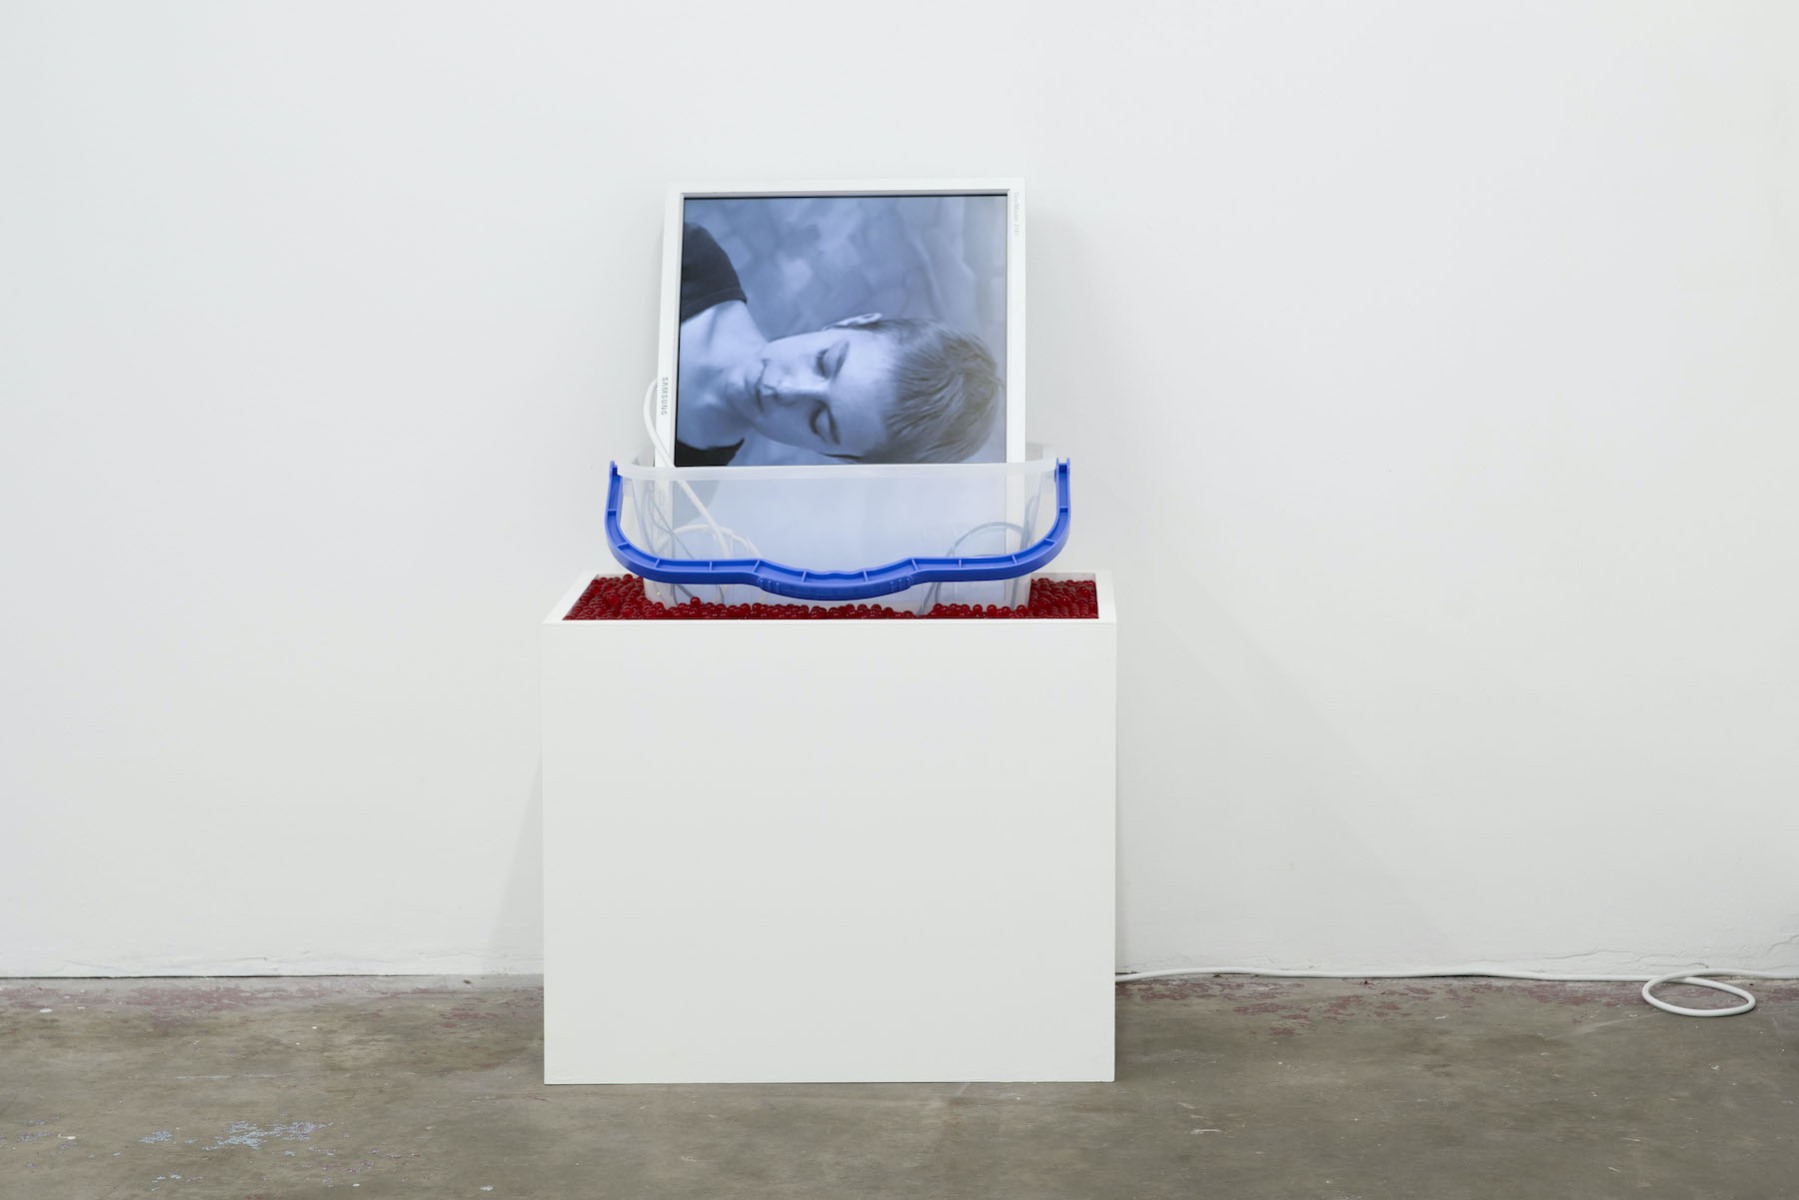 A screen showing the artist's head sits sideways in a plastic bucket. The bucket is surrounded with small red beads and sits atop a white plinth